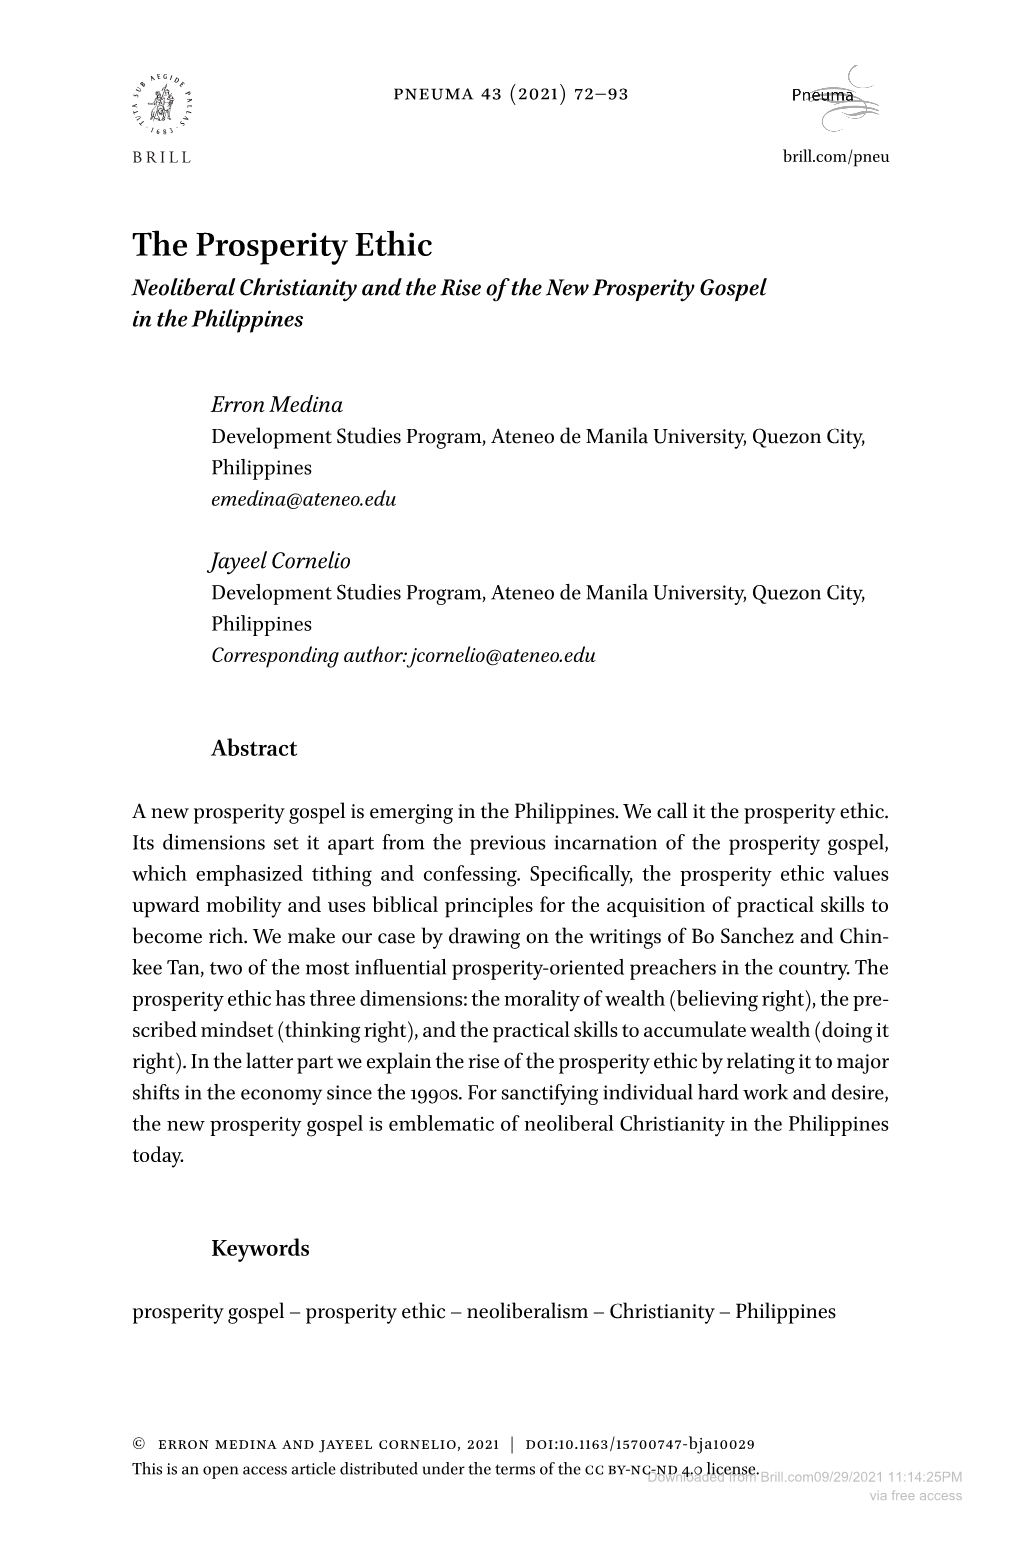 The Prosperity Ethic Neoliberal Christianity and the Rise of the New Prosperity Gospel in the Philippines